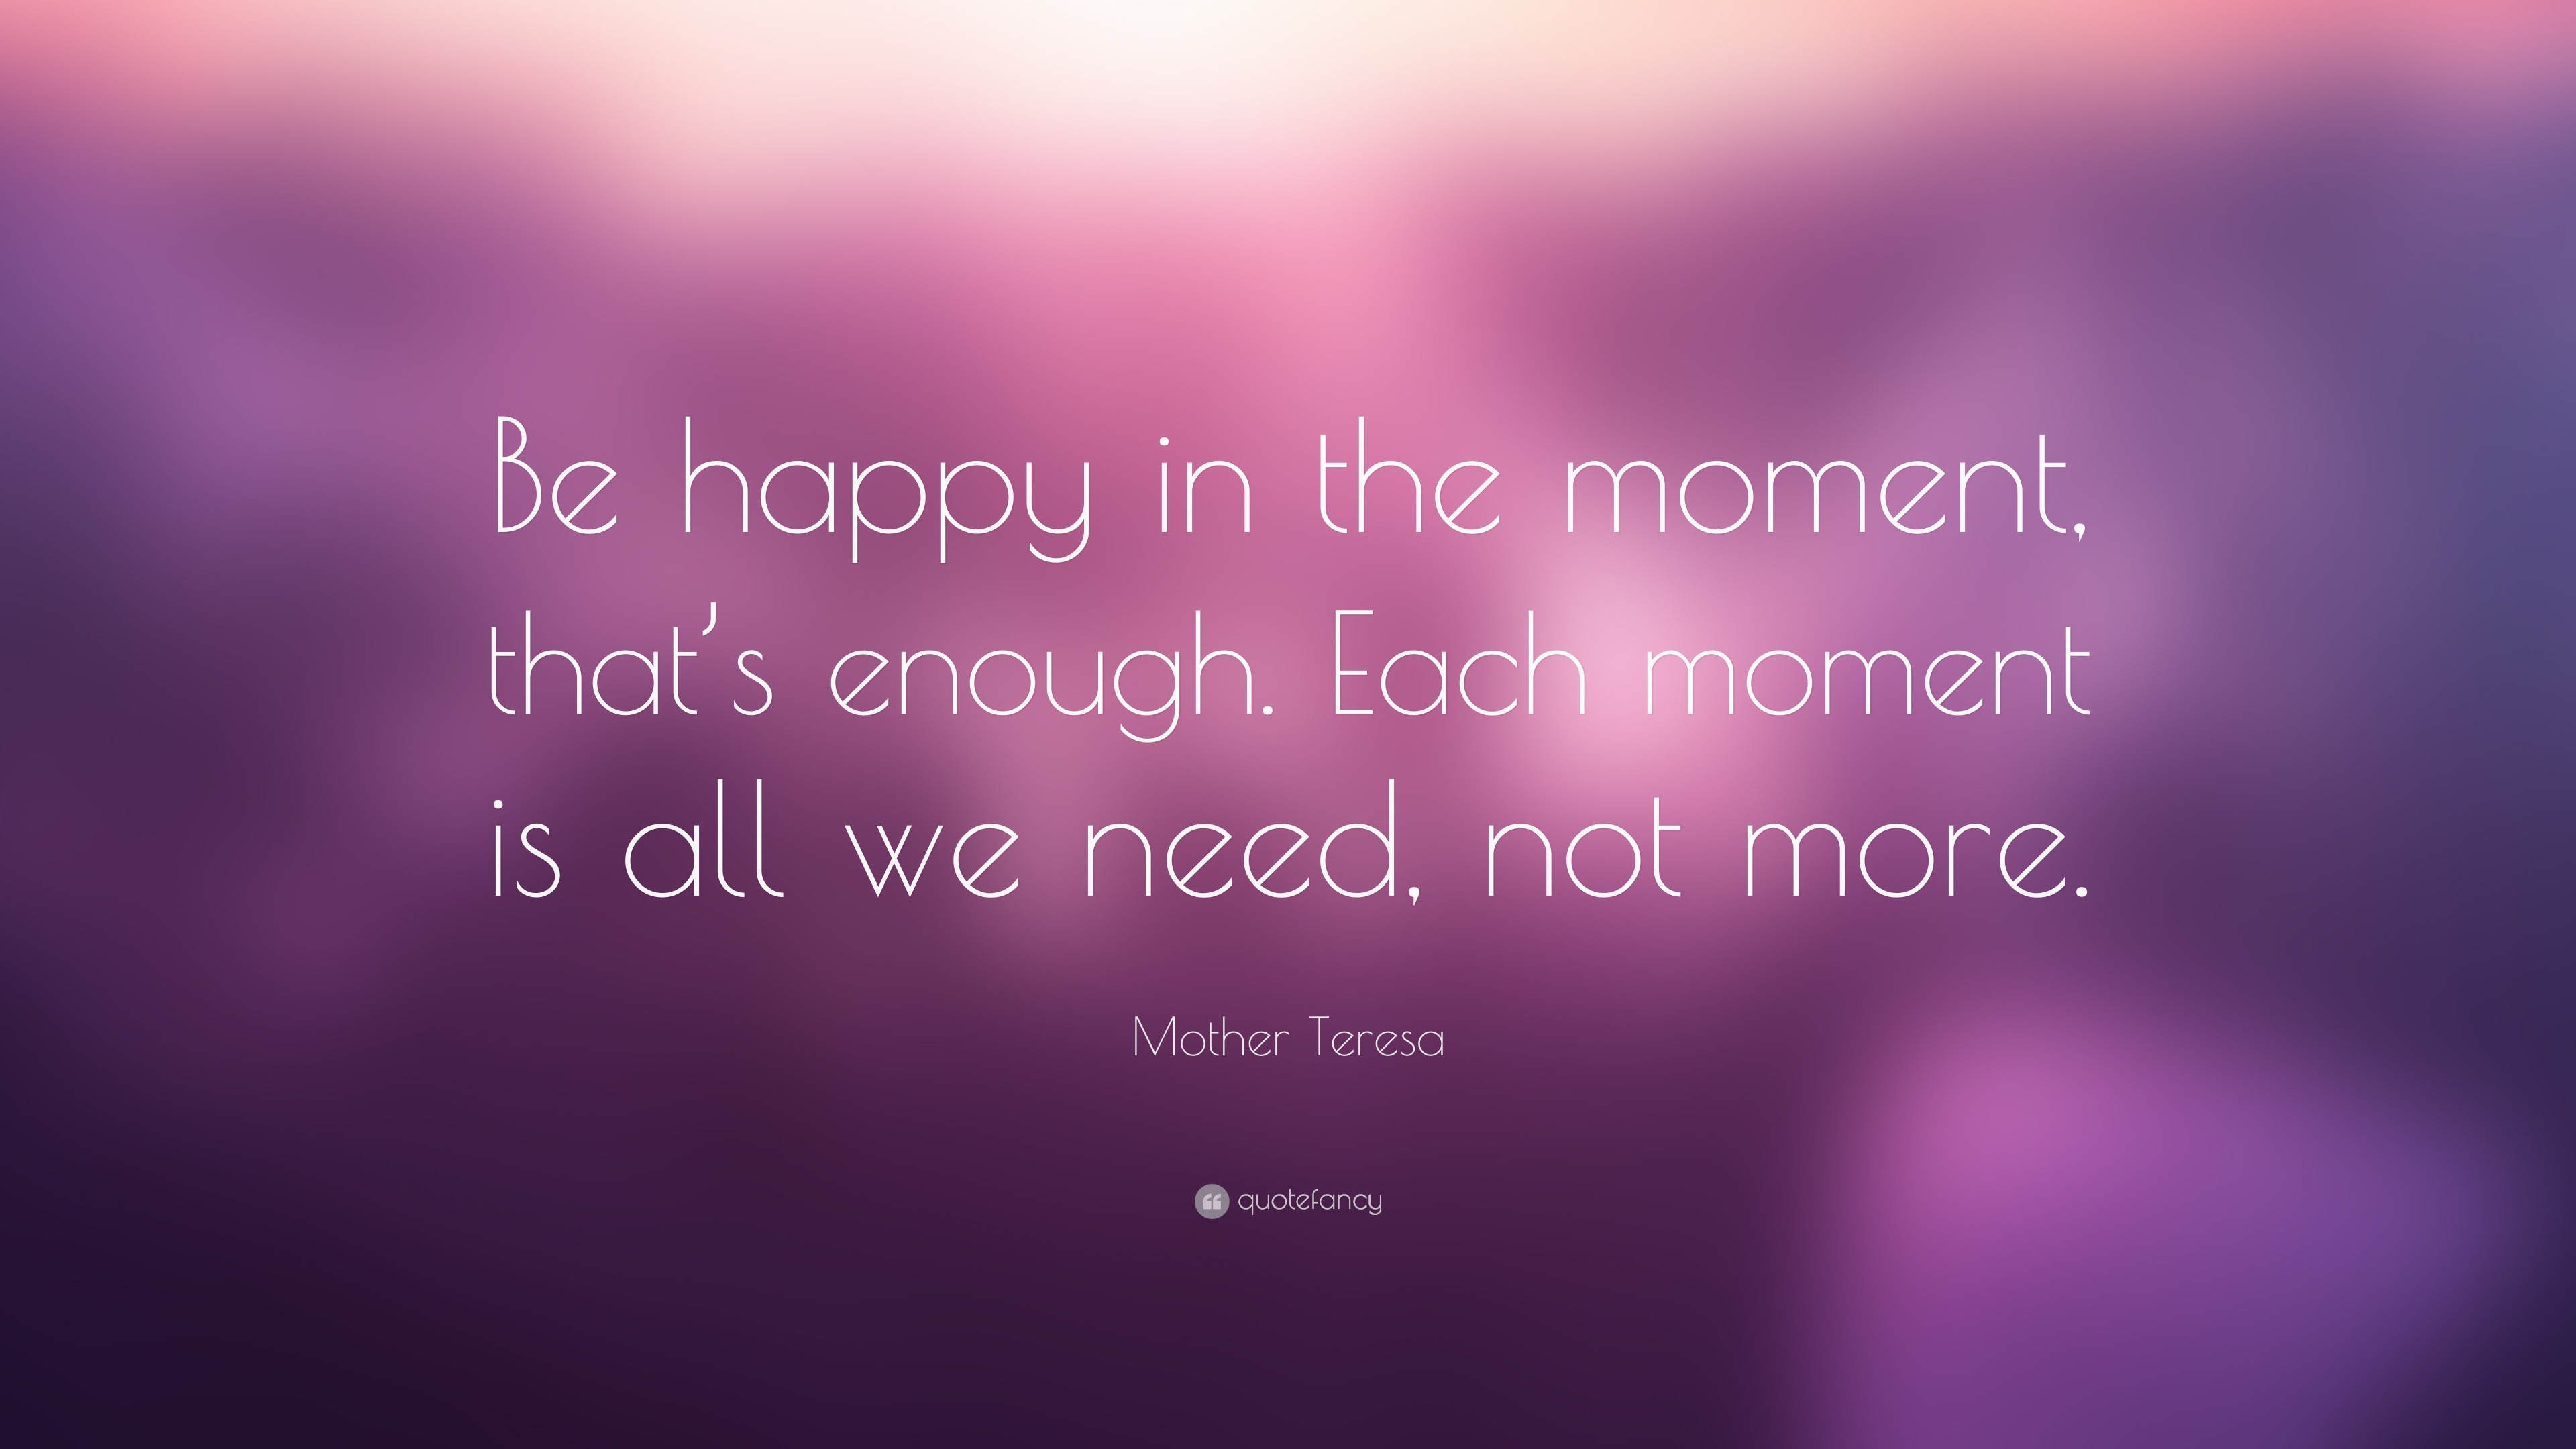 Mother Teresa Quote: “Be happy in the moment, that’s enough. Each ...